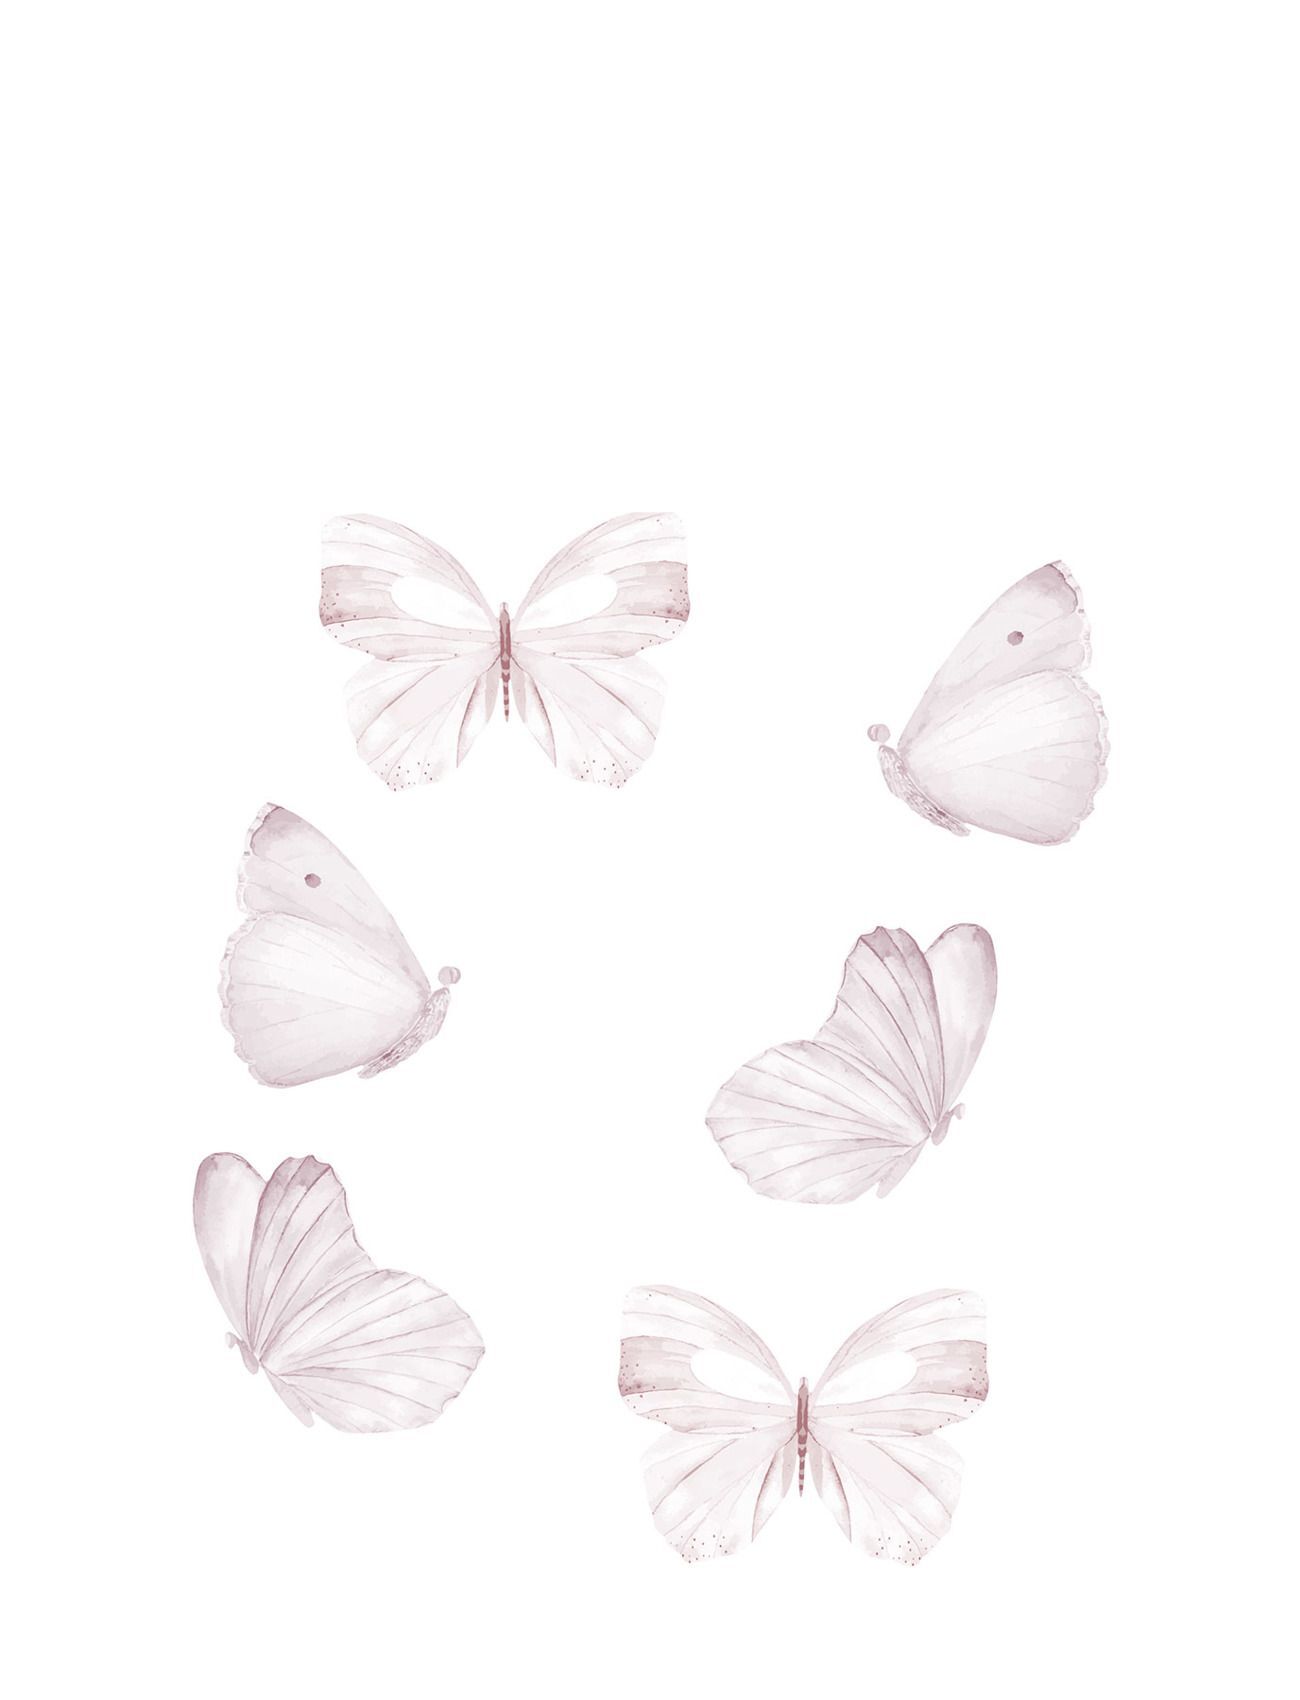 That's Write Wall Sticker Butterflies Set Of 6 White Home Kids Decor Wall Stickers Rosa That's Mine